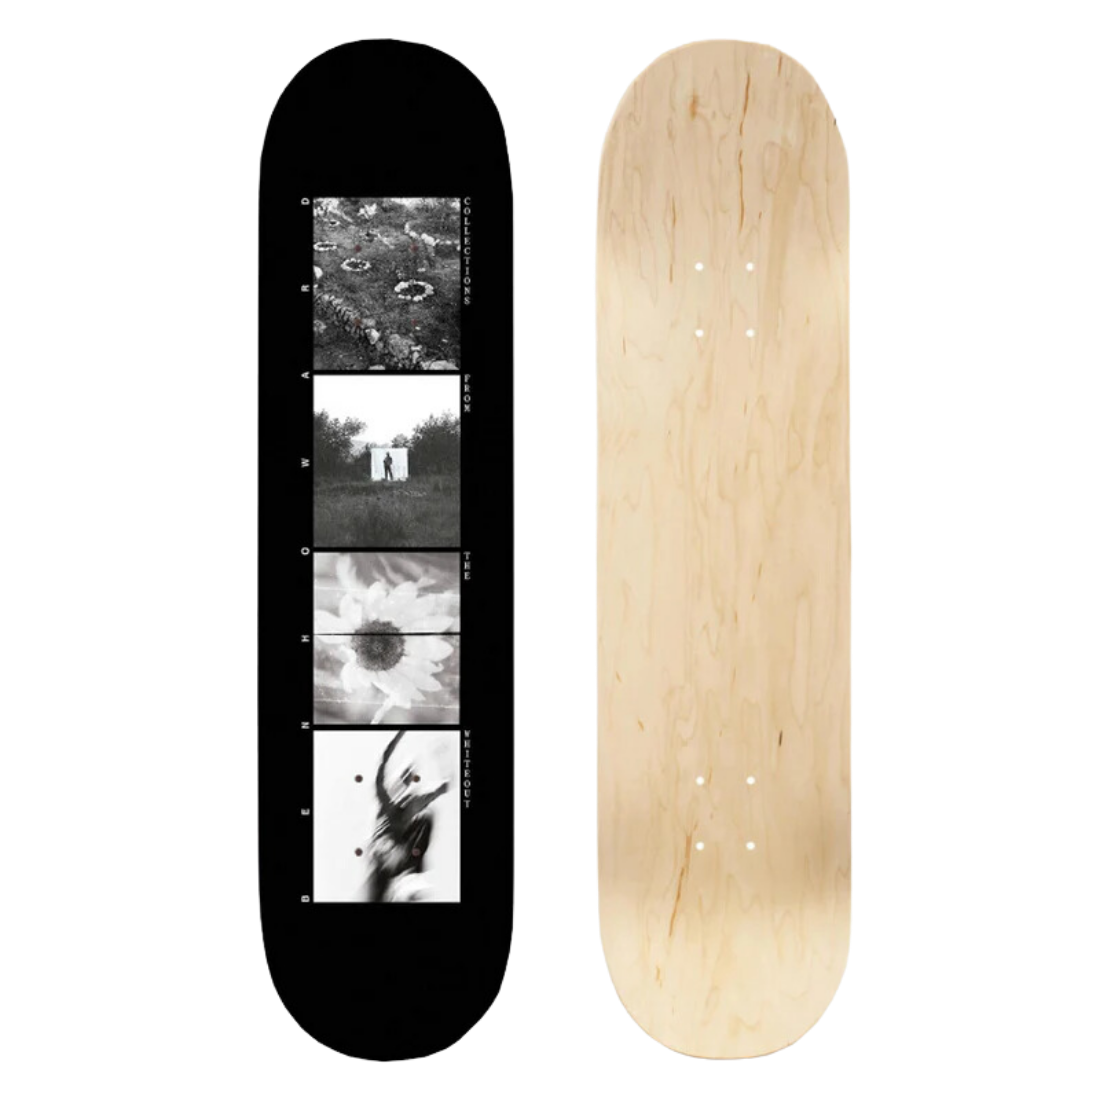 Ben Howard - Collections From The Whiteout: Black Skatedeck 8"